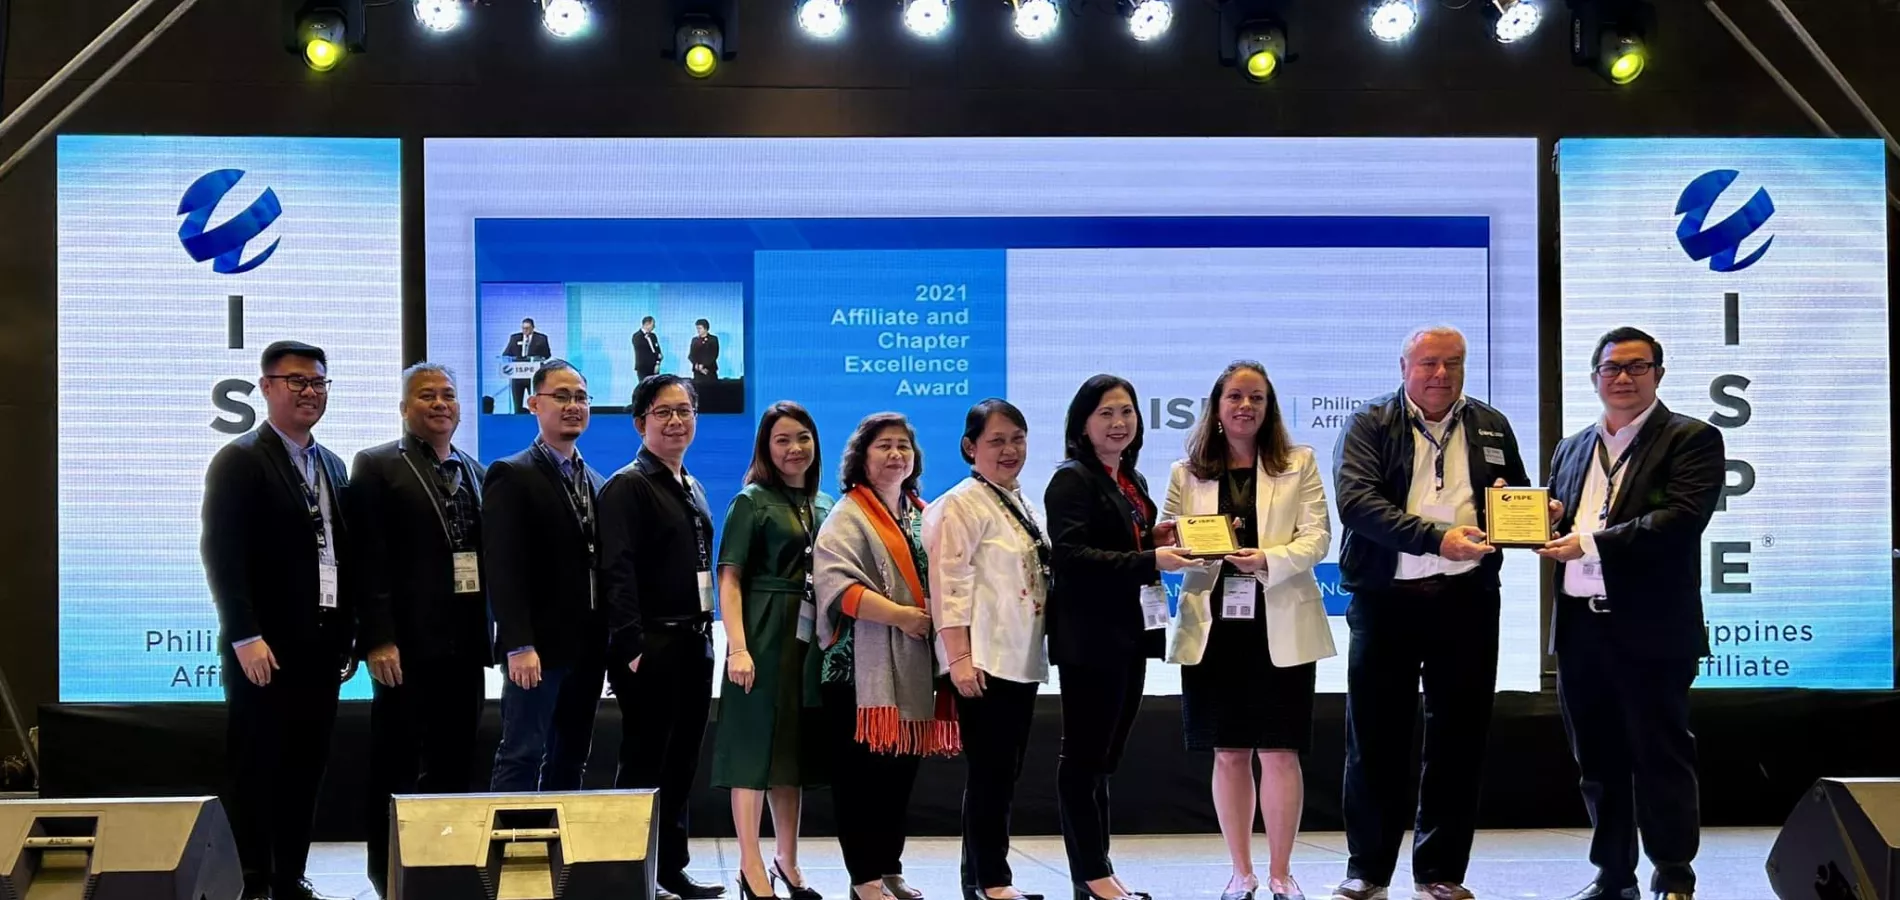 Philippines Affiliate receiving the 2021 Affiliate of the Year Award